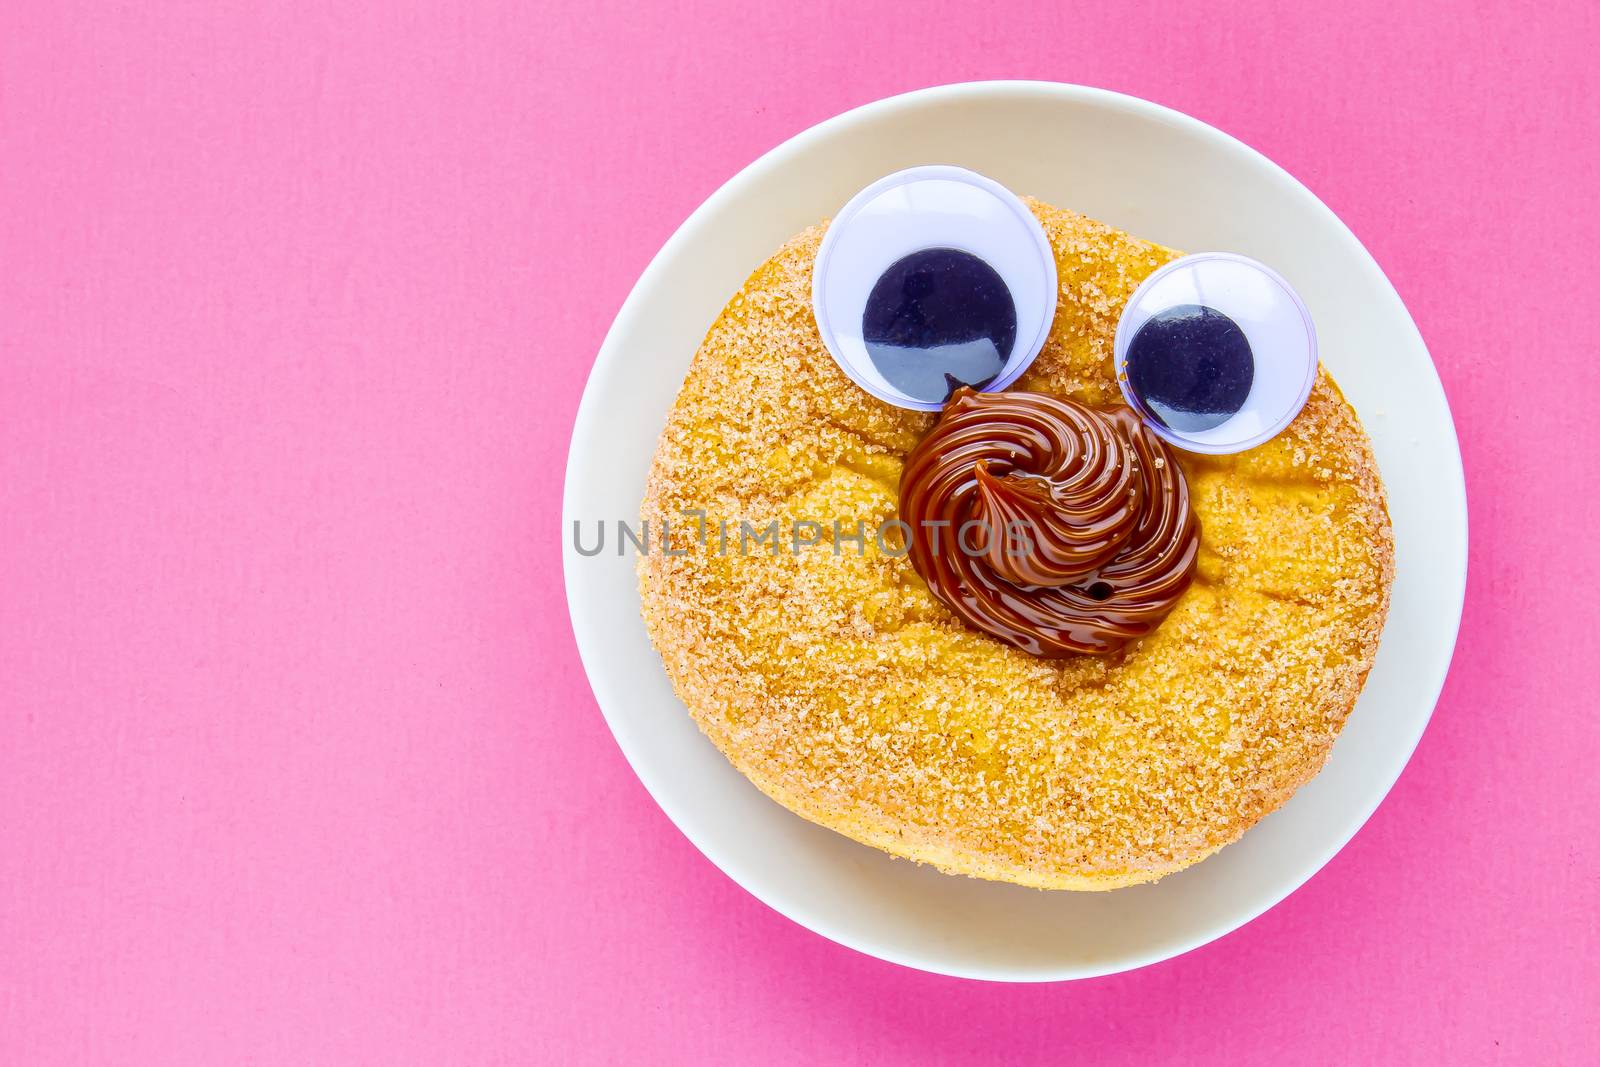 A Tim Hortons Dulce de Leche Donut with Black Wiggle Googly Eyeballs on a plate with pink background